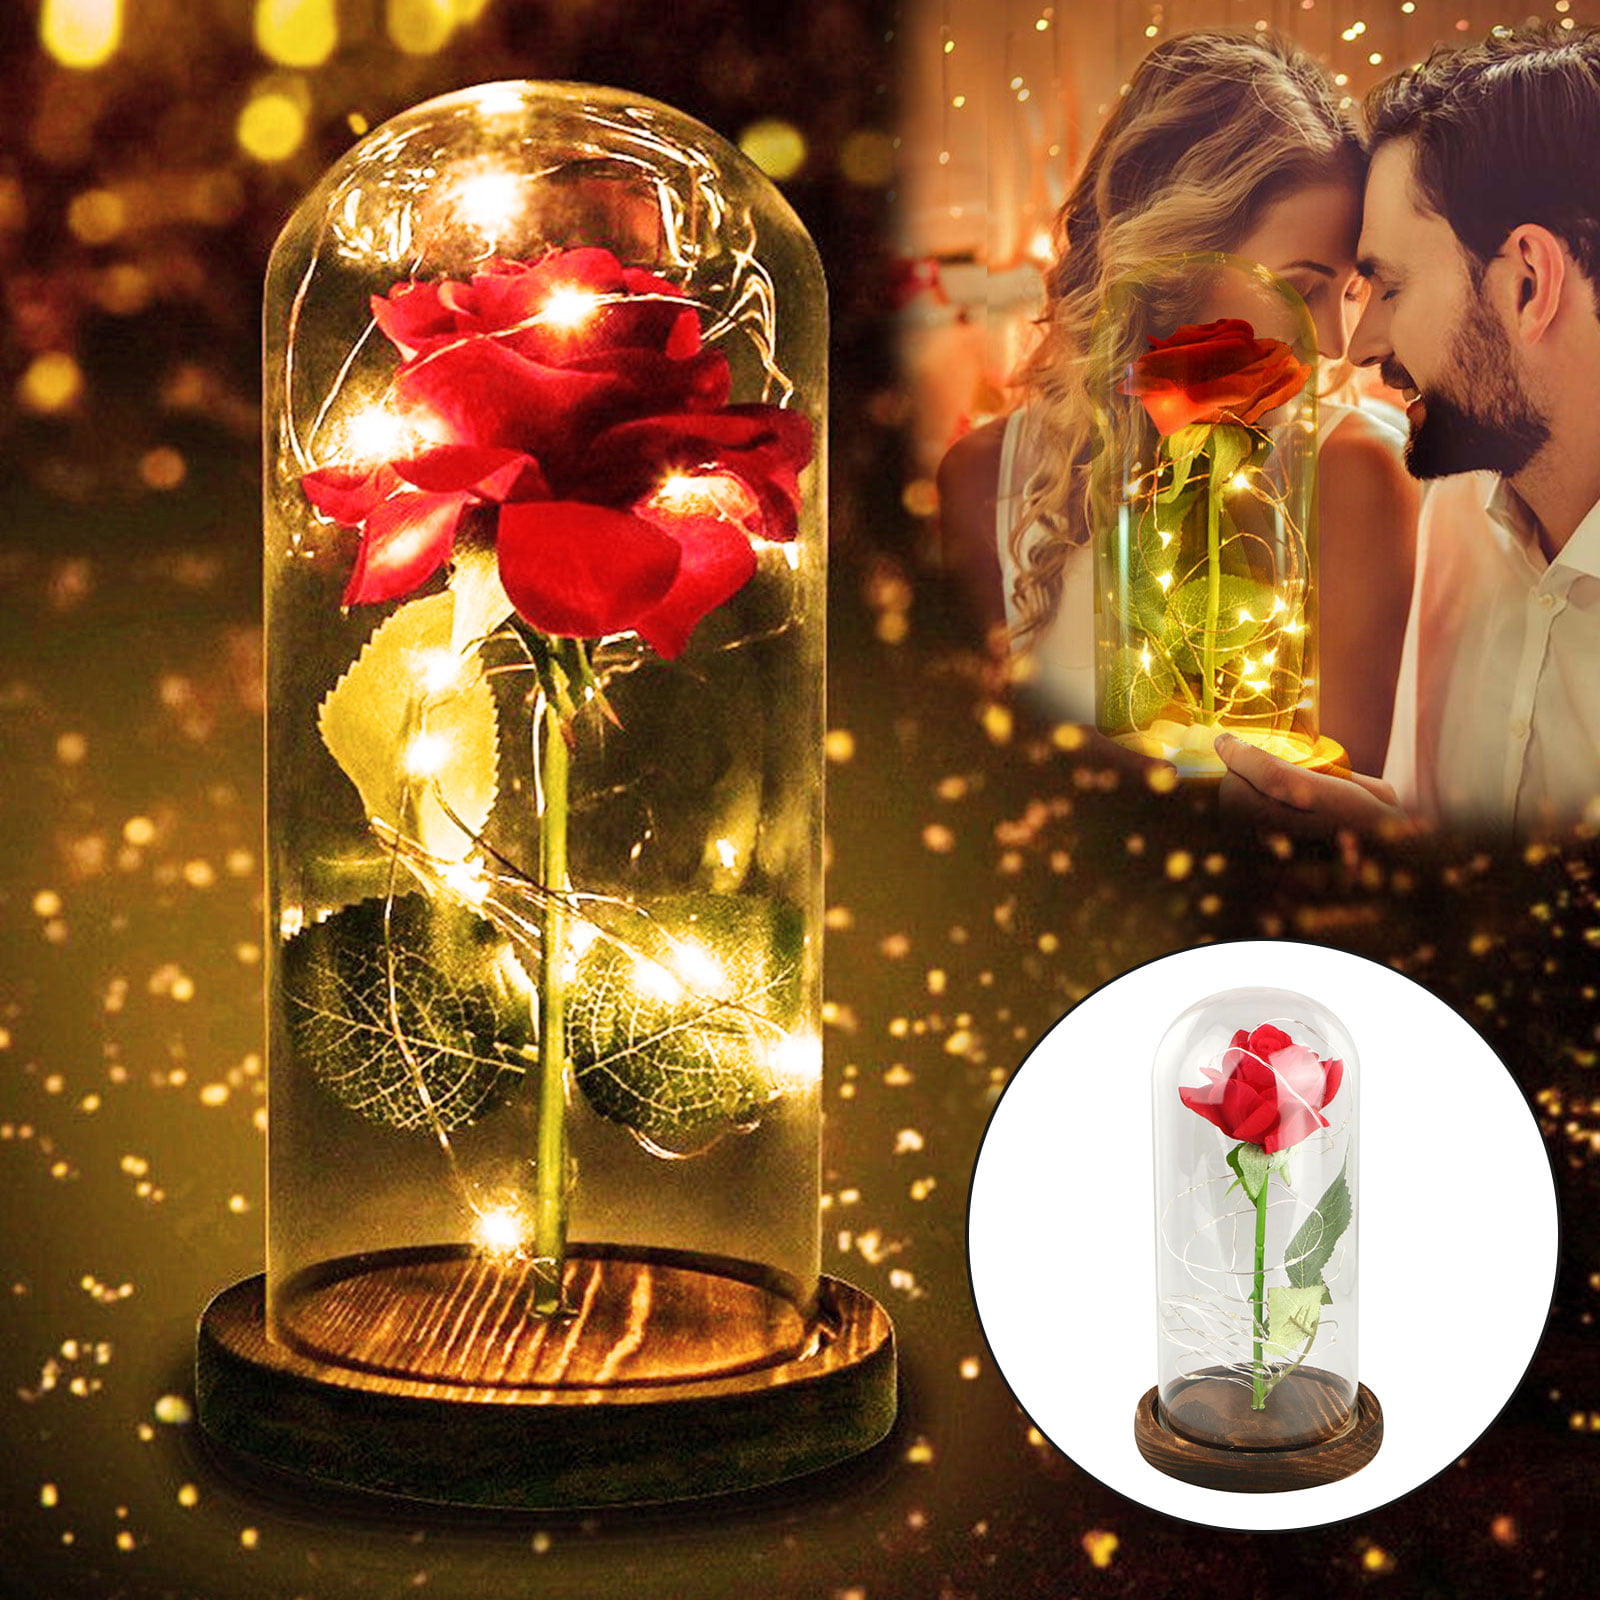 TOPUUTP Artificial Glass Cover Rose Flowers,TOPUUTP Romantic Gift for Him Her Firlfriend Wife Mother, with no Battery